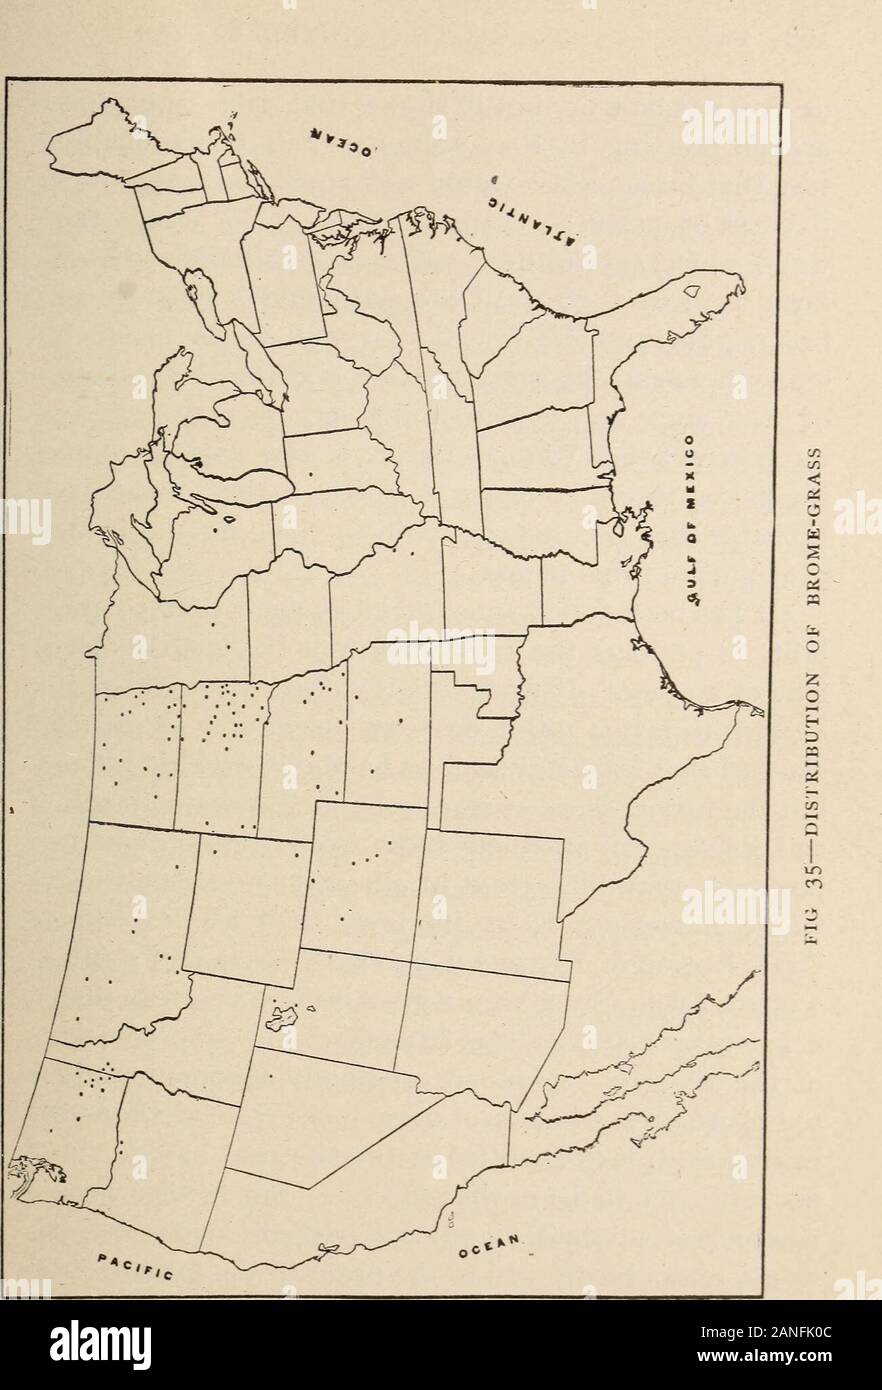 Farm grasses of the United States; a practical treatise on the grass crop, seeding and management of meadows and pastures, descriptions of the best varieties, the seed and its impurities, grasses for special conditions, etc., etc . as it is farther west.In the West it had no competitors as a pasture-grass,while in the East it had to compete with several long-established and highly satisfactory grasses, particularlytimothy and blue-grass. It has already been statedthat nearly all the grass literature issued by the Stateexperiment stations comes from those stations outsideof the region of timoth Stock Photo